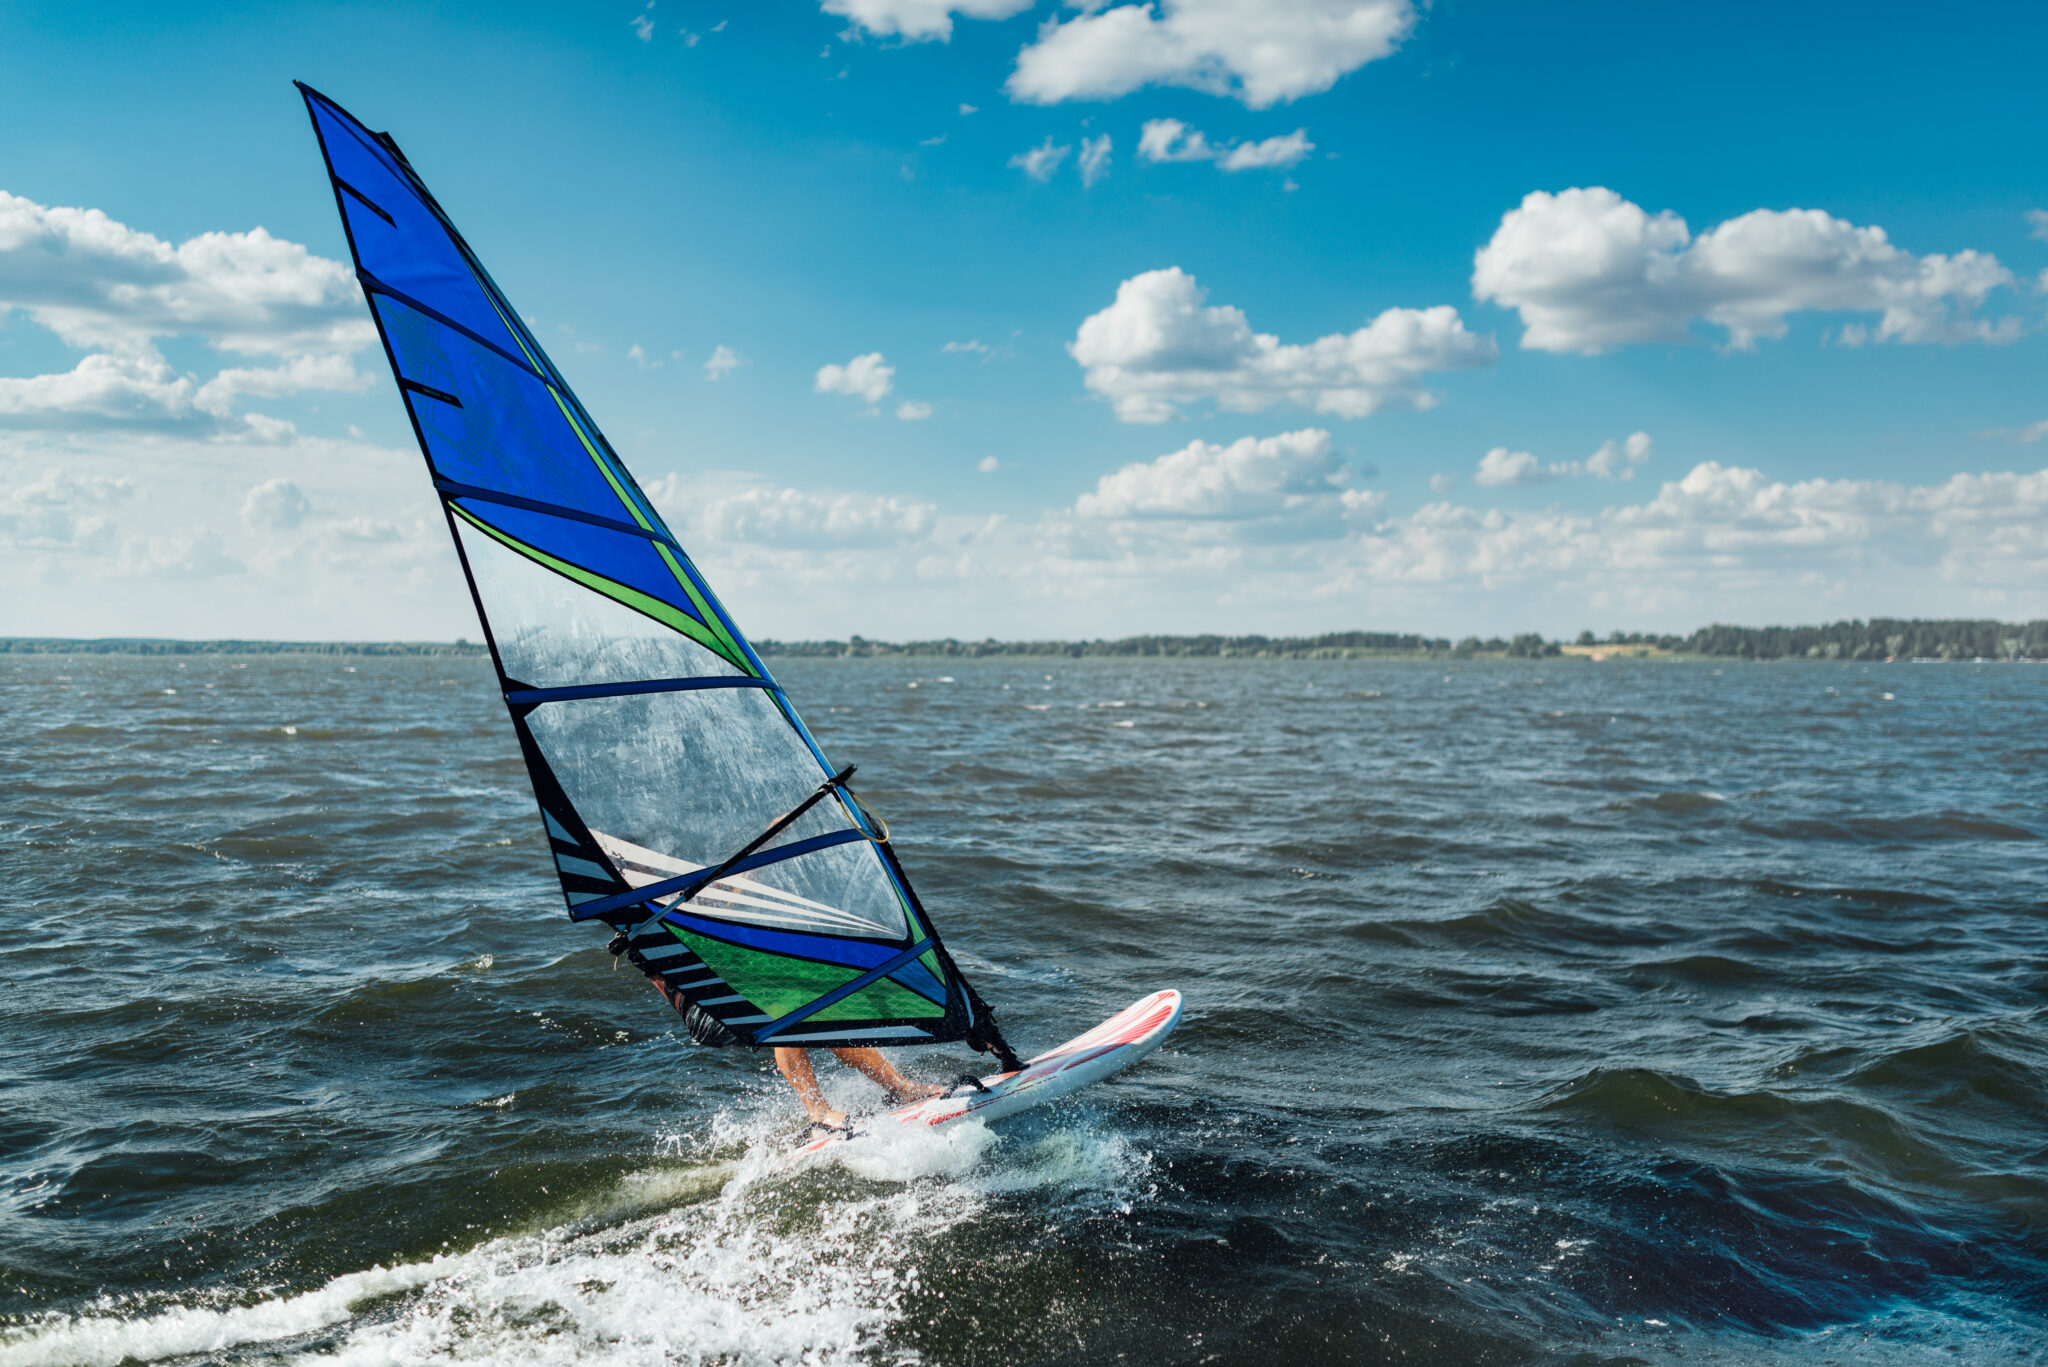 the man athlete rides the windsurf over the waves on the lake